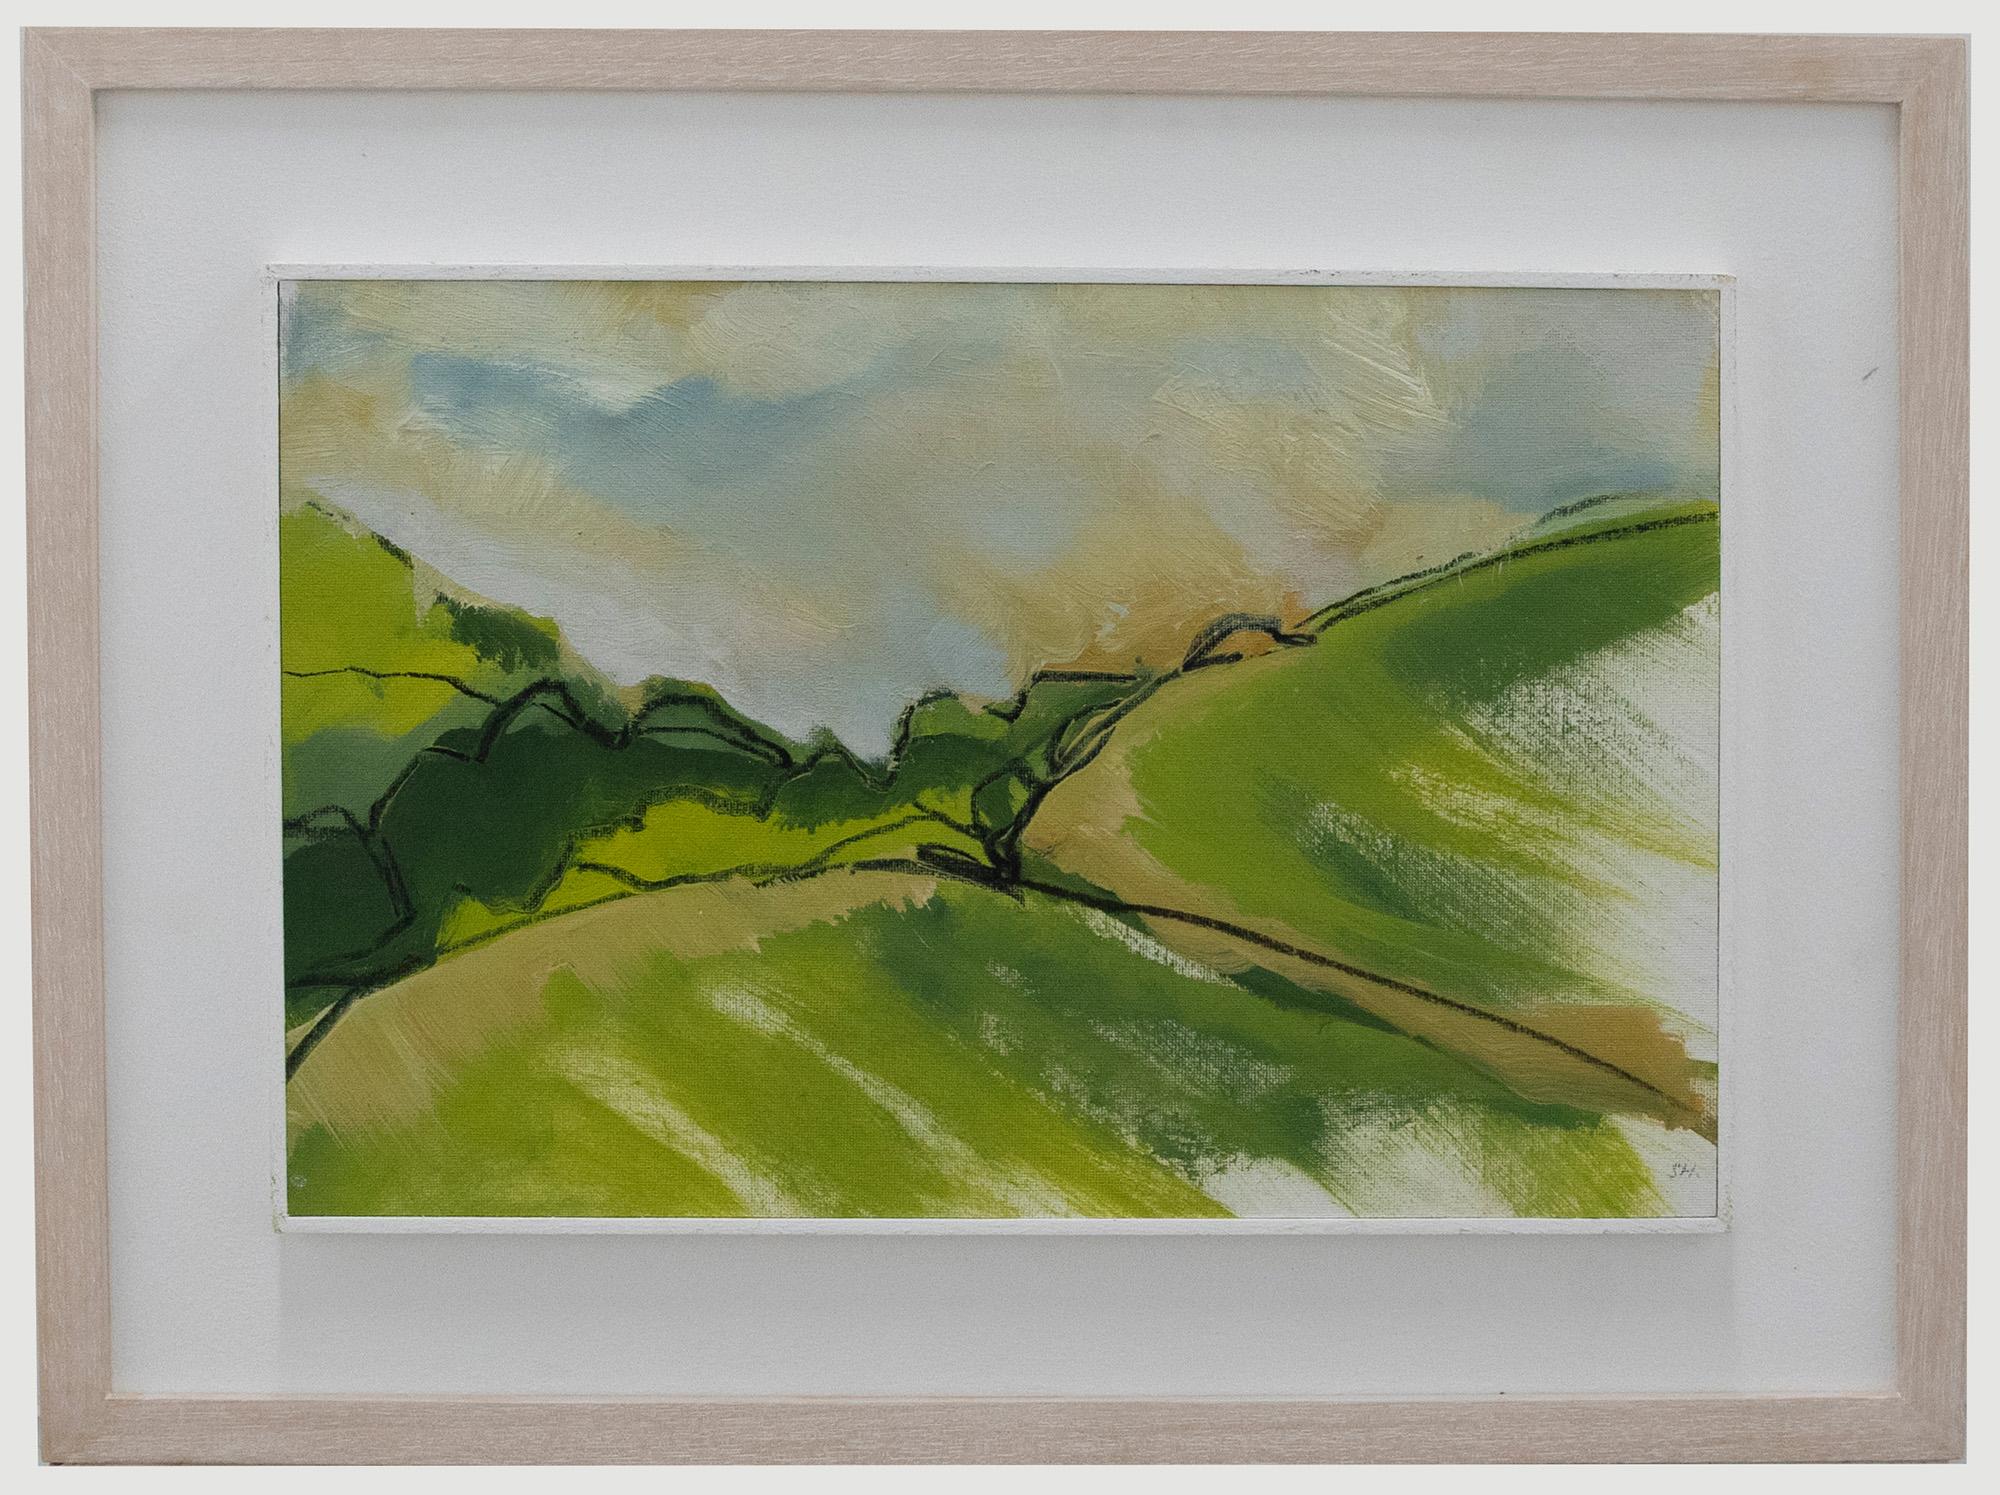 An original mix media painting by contemporary artist sue Halliday. The scene depicts a verdant Cornish valley hit with the first rays of sun. The artist has signed with initials to the lower right and presented the painting in a beautiful custom